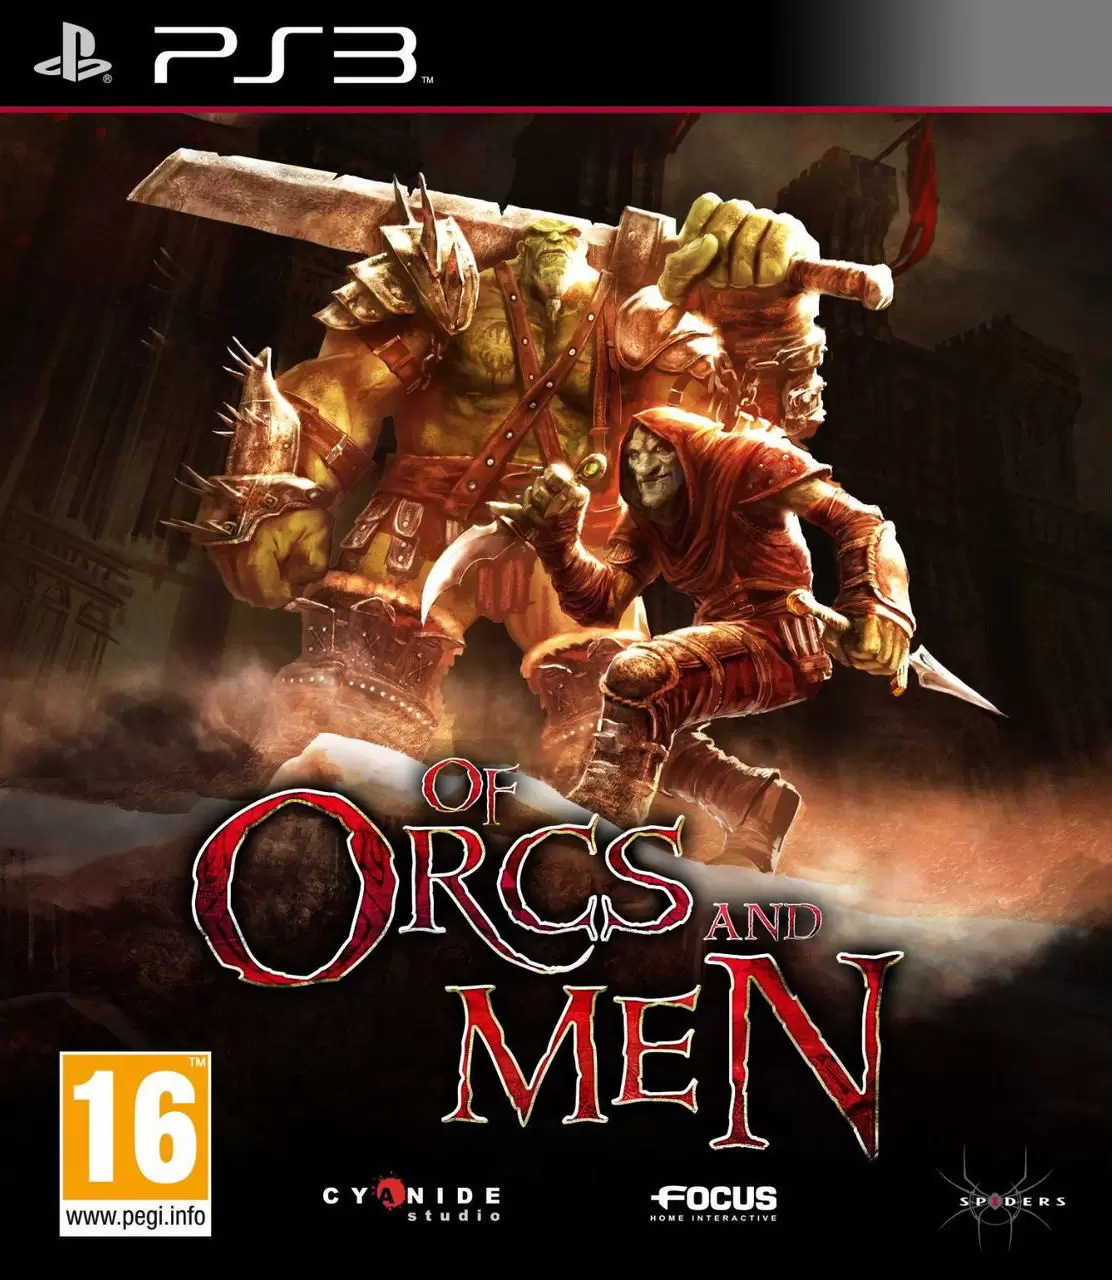 PS3 Games - Of Orcs and Men